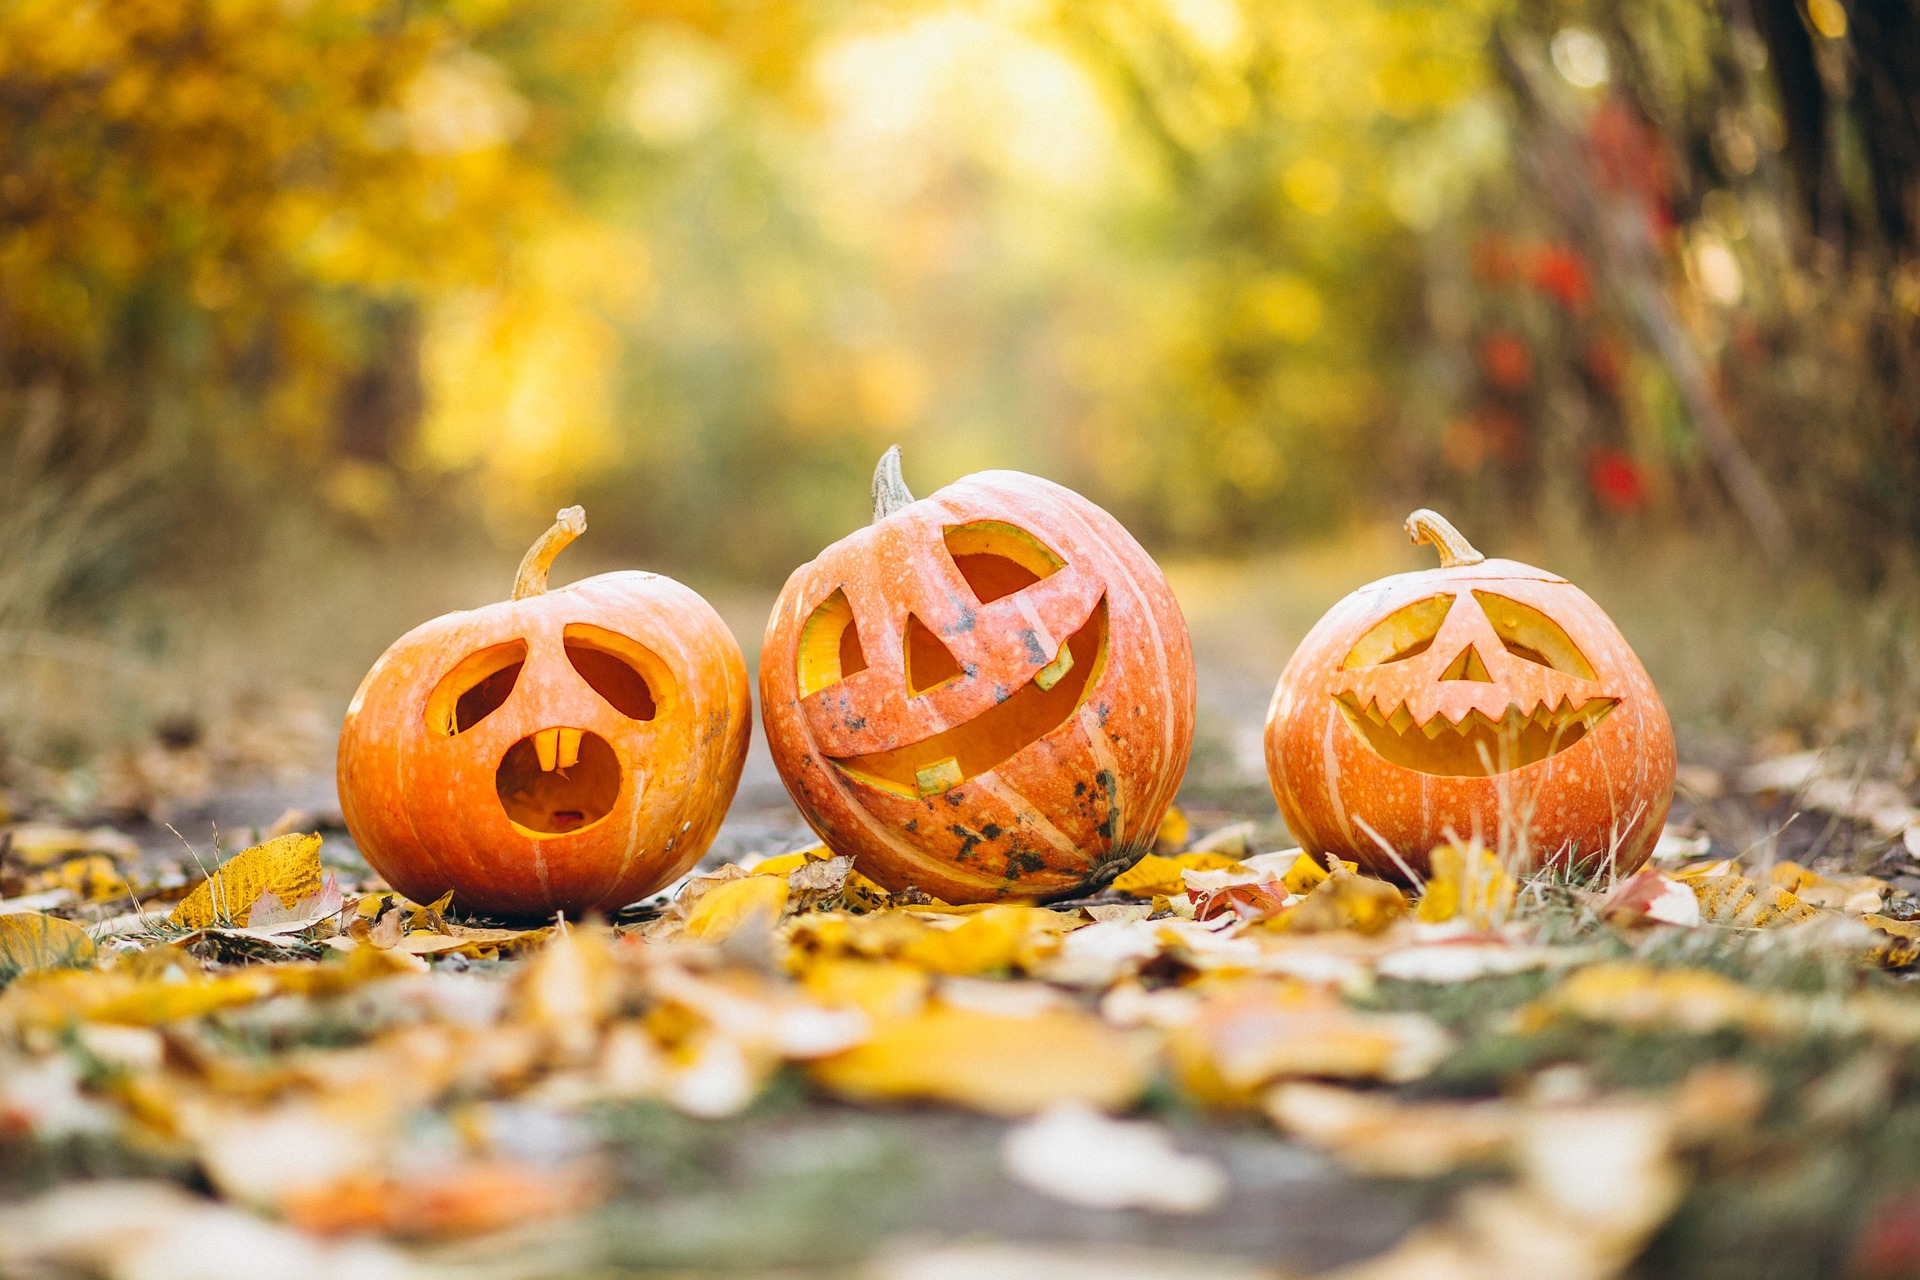 Spooktacular Fun with Safety: Halloween Tips for Families